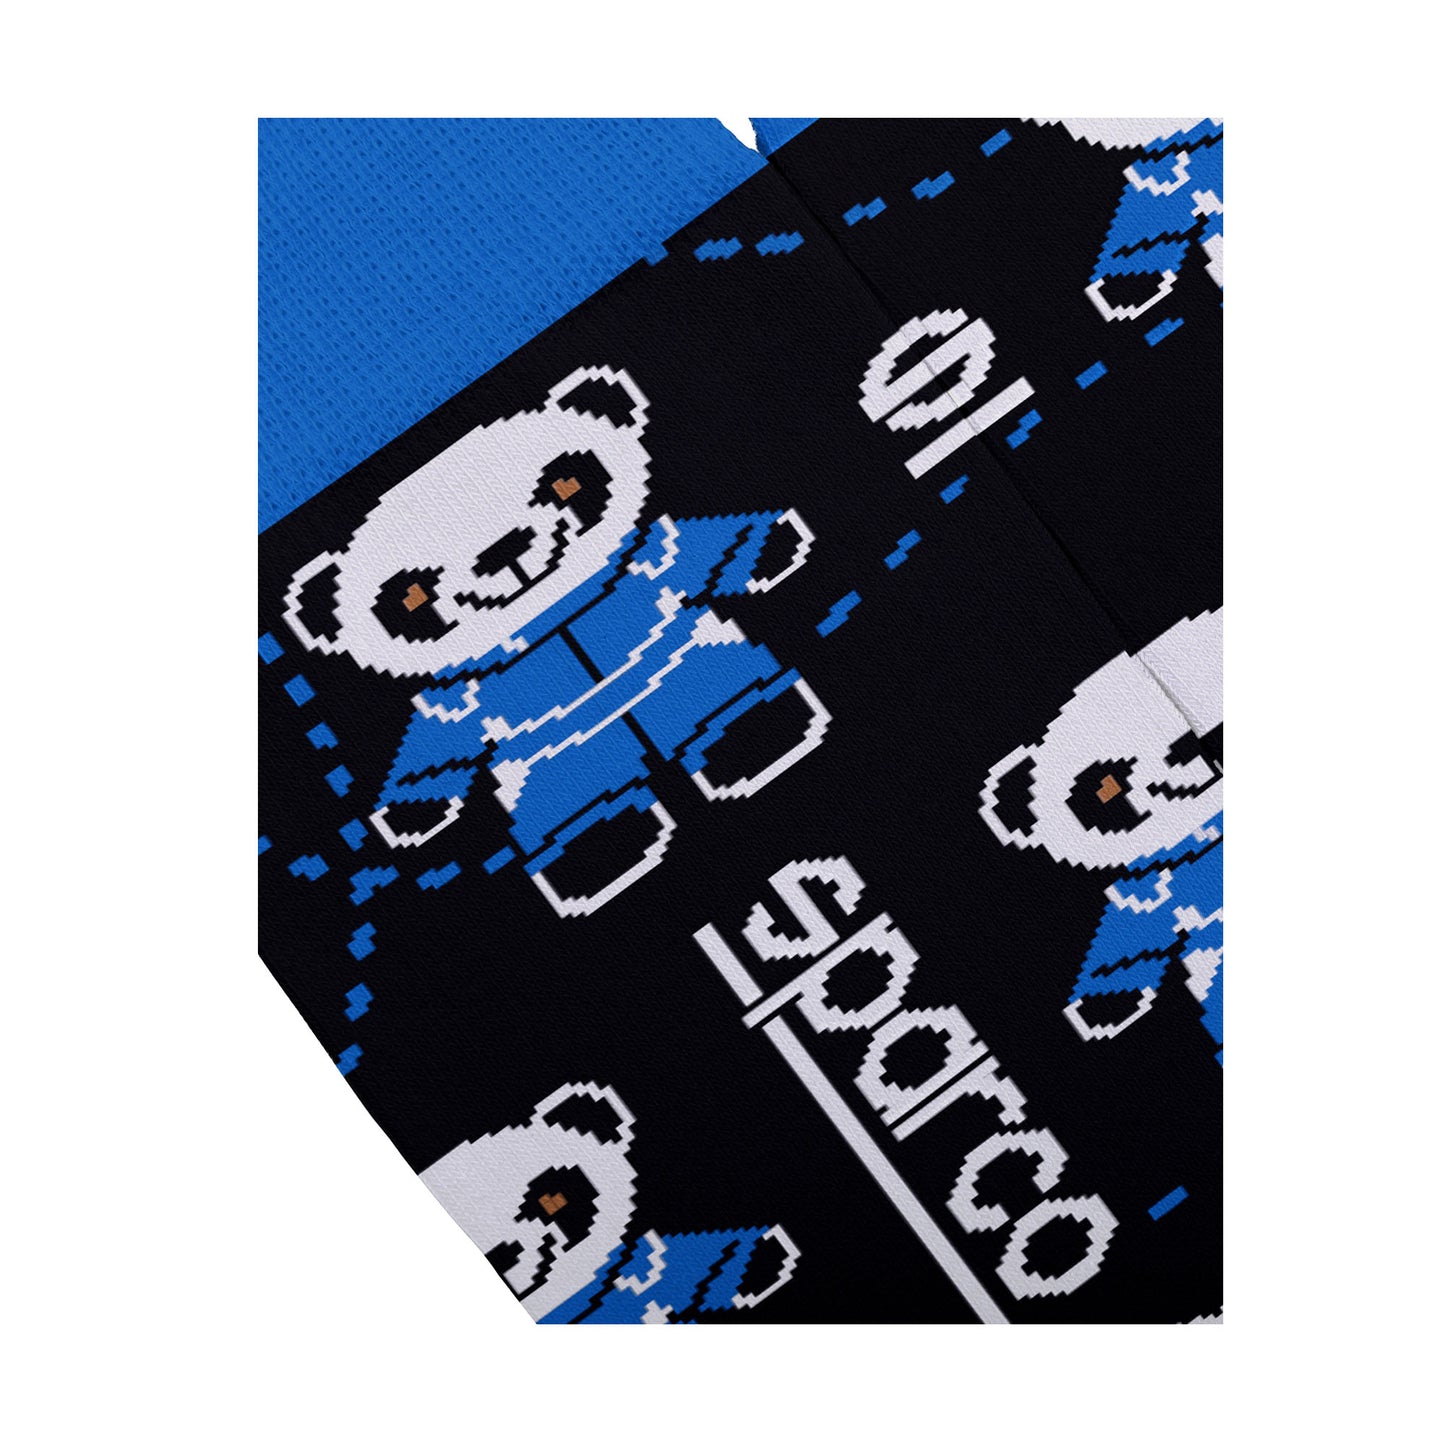 Sparco Socks Panda Iconic Design in 2 Sizes Official Merchandise Leisurewear